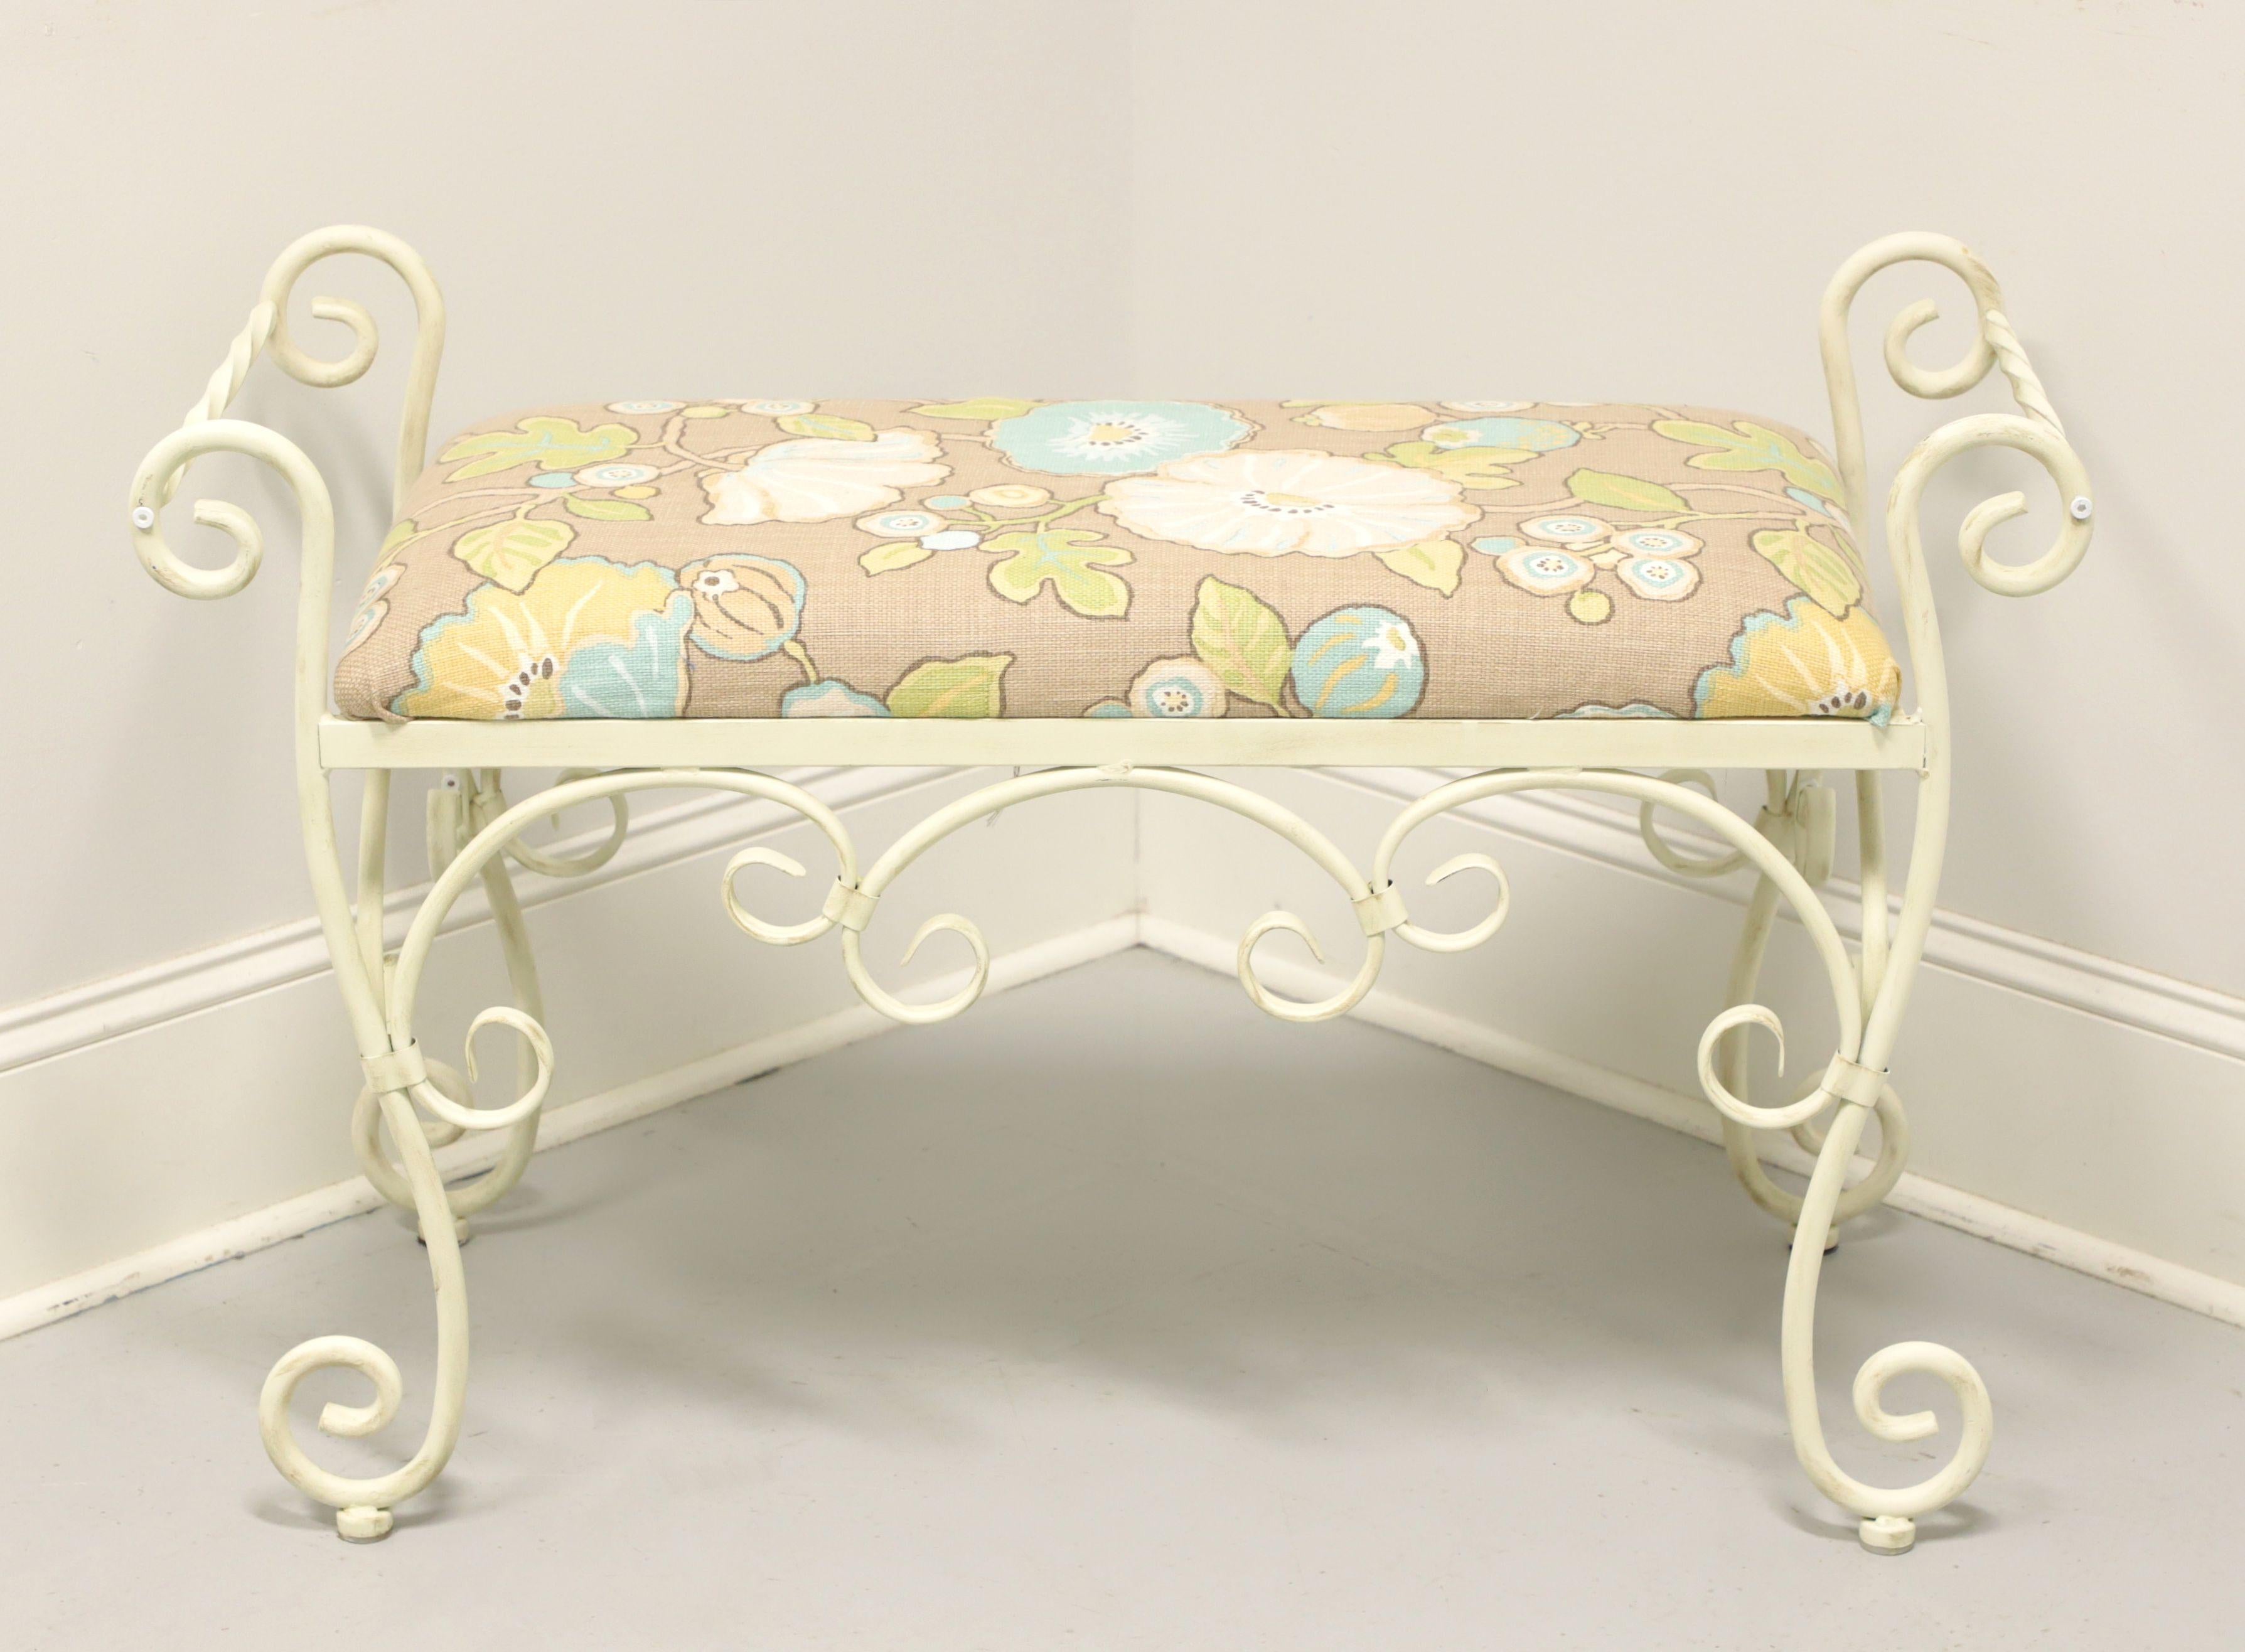 Other Vintage Wrought Iron White Painted Vanity Bench For Sale